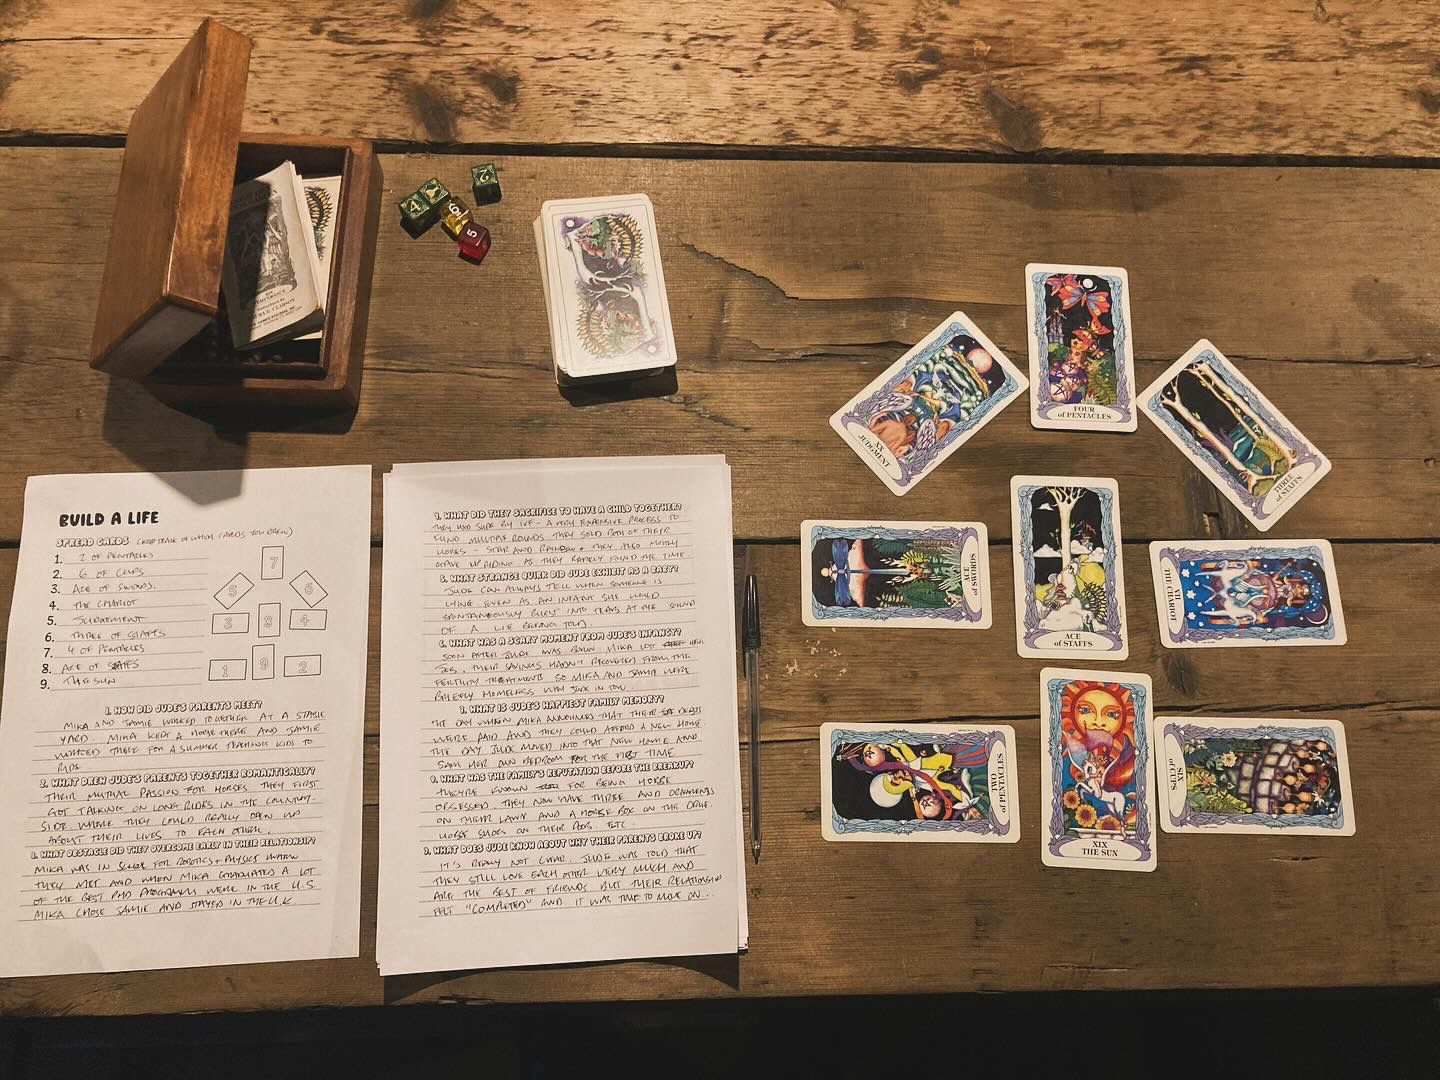 A nine card tarot spread on a wooden table next to a couple of scrawled pages of workbook answers. A complete Build a Life spread from the upcoming game, Jude's World